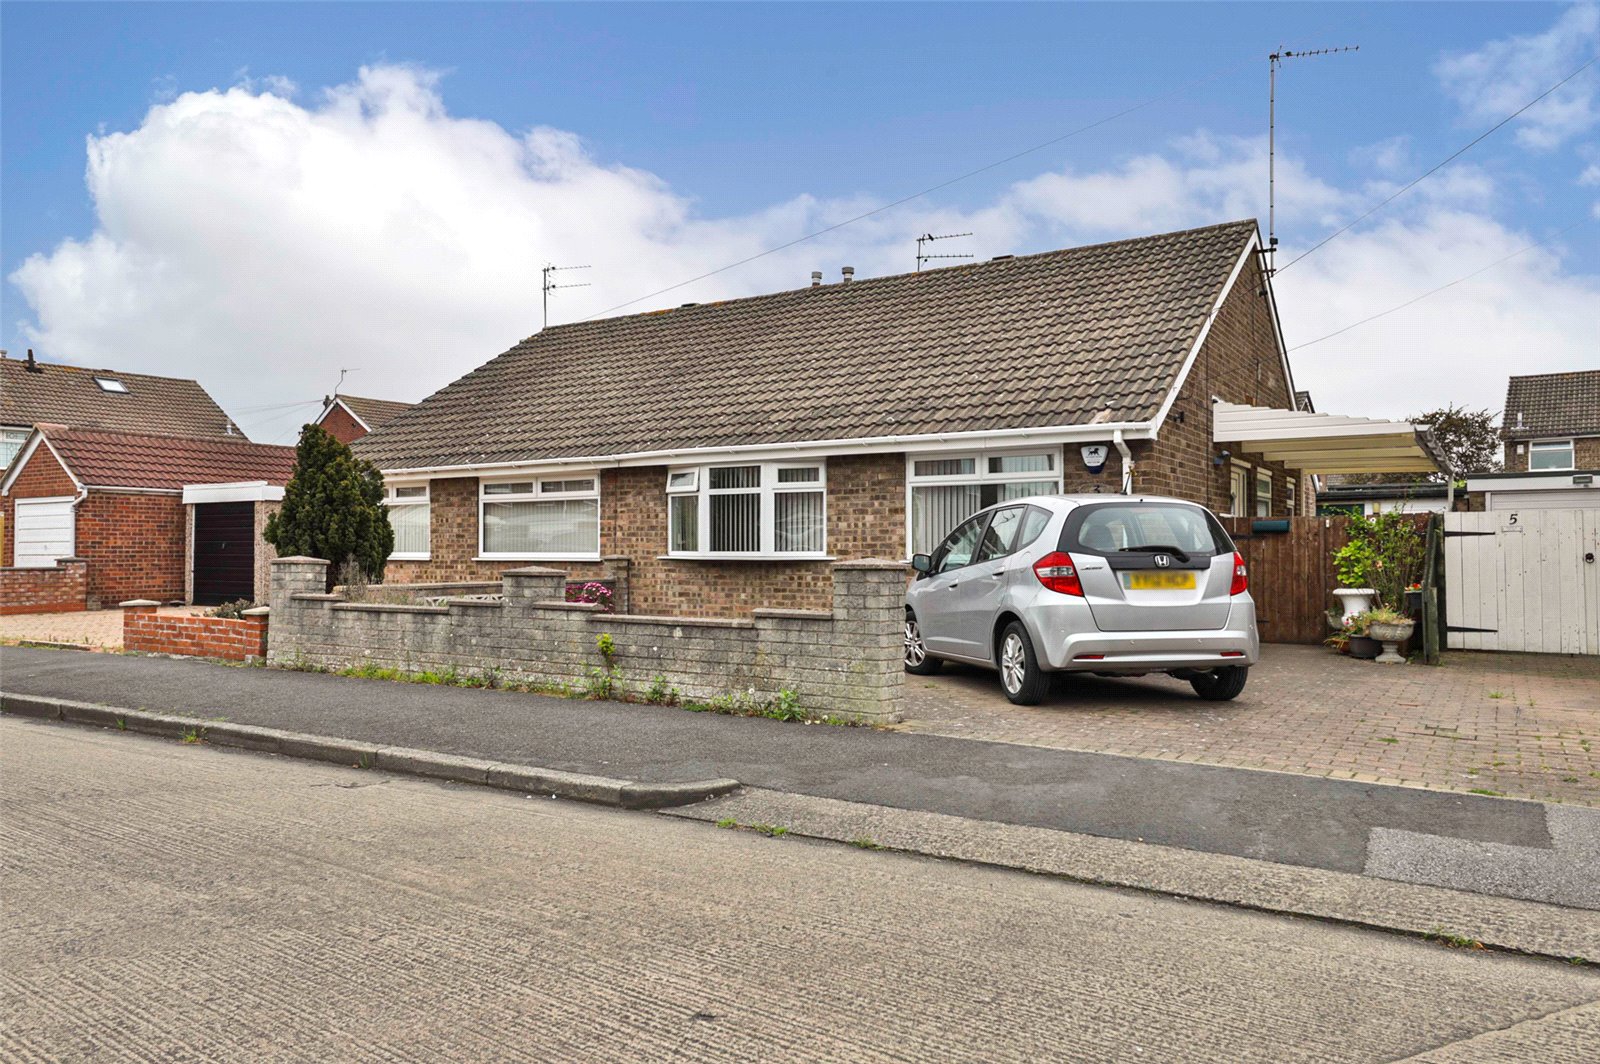 3 bed bungalow for sale in Langford Walk, Hull, HU4 